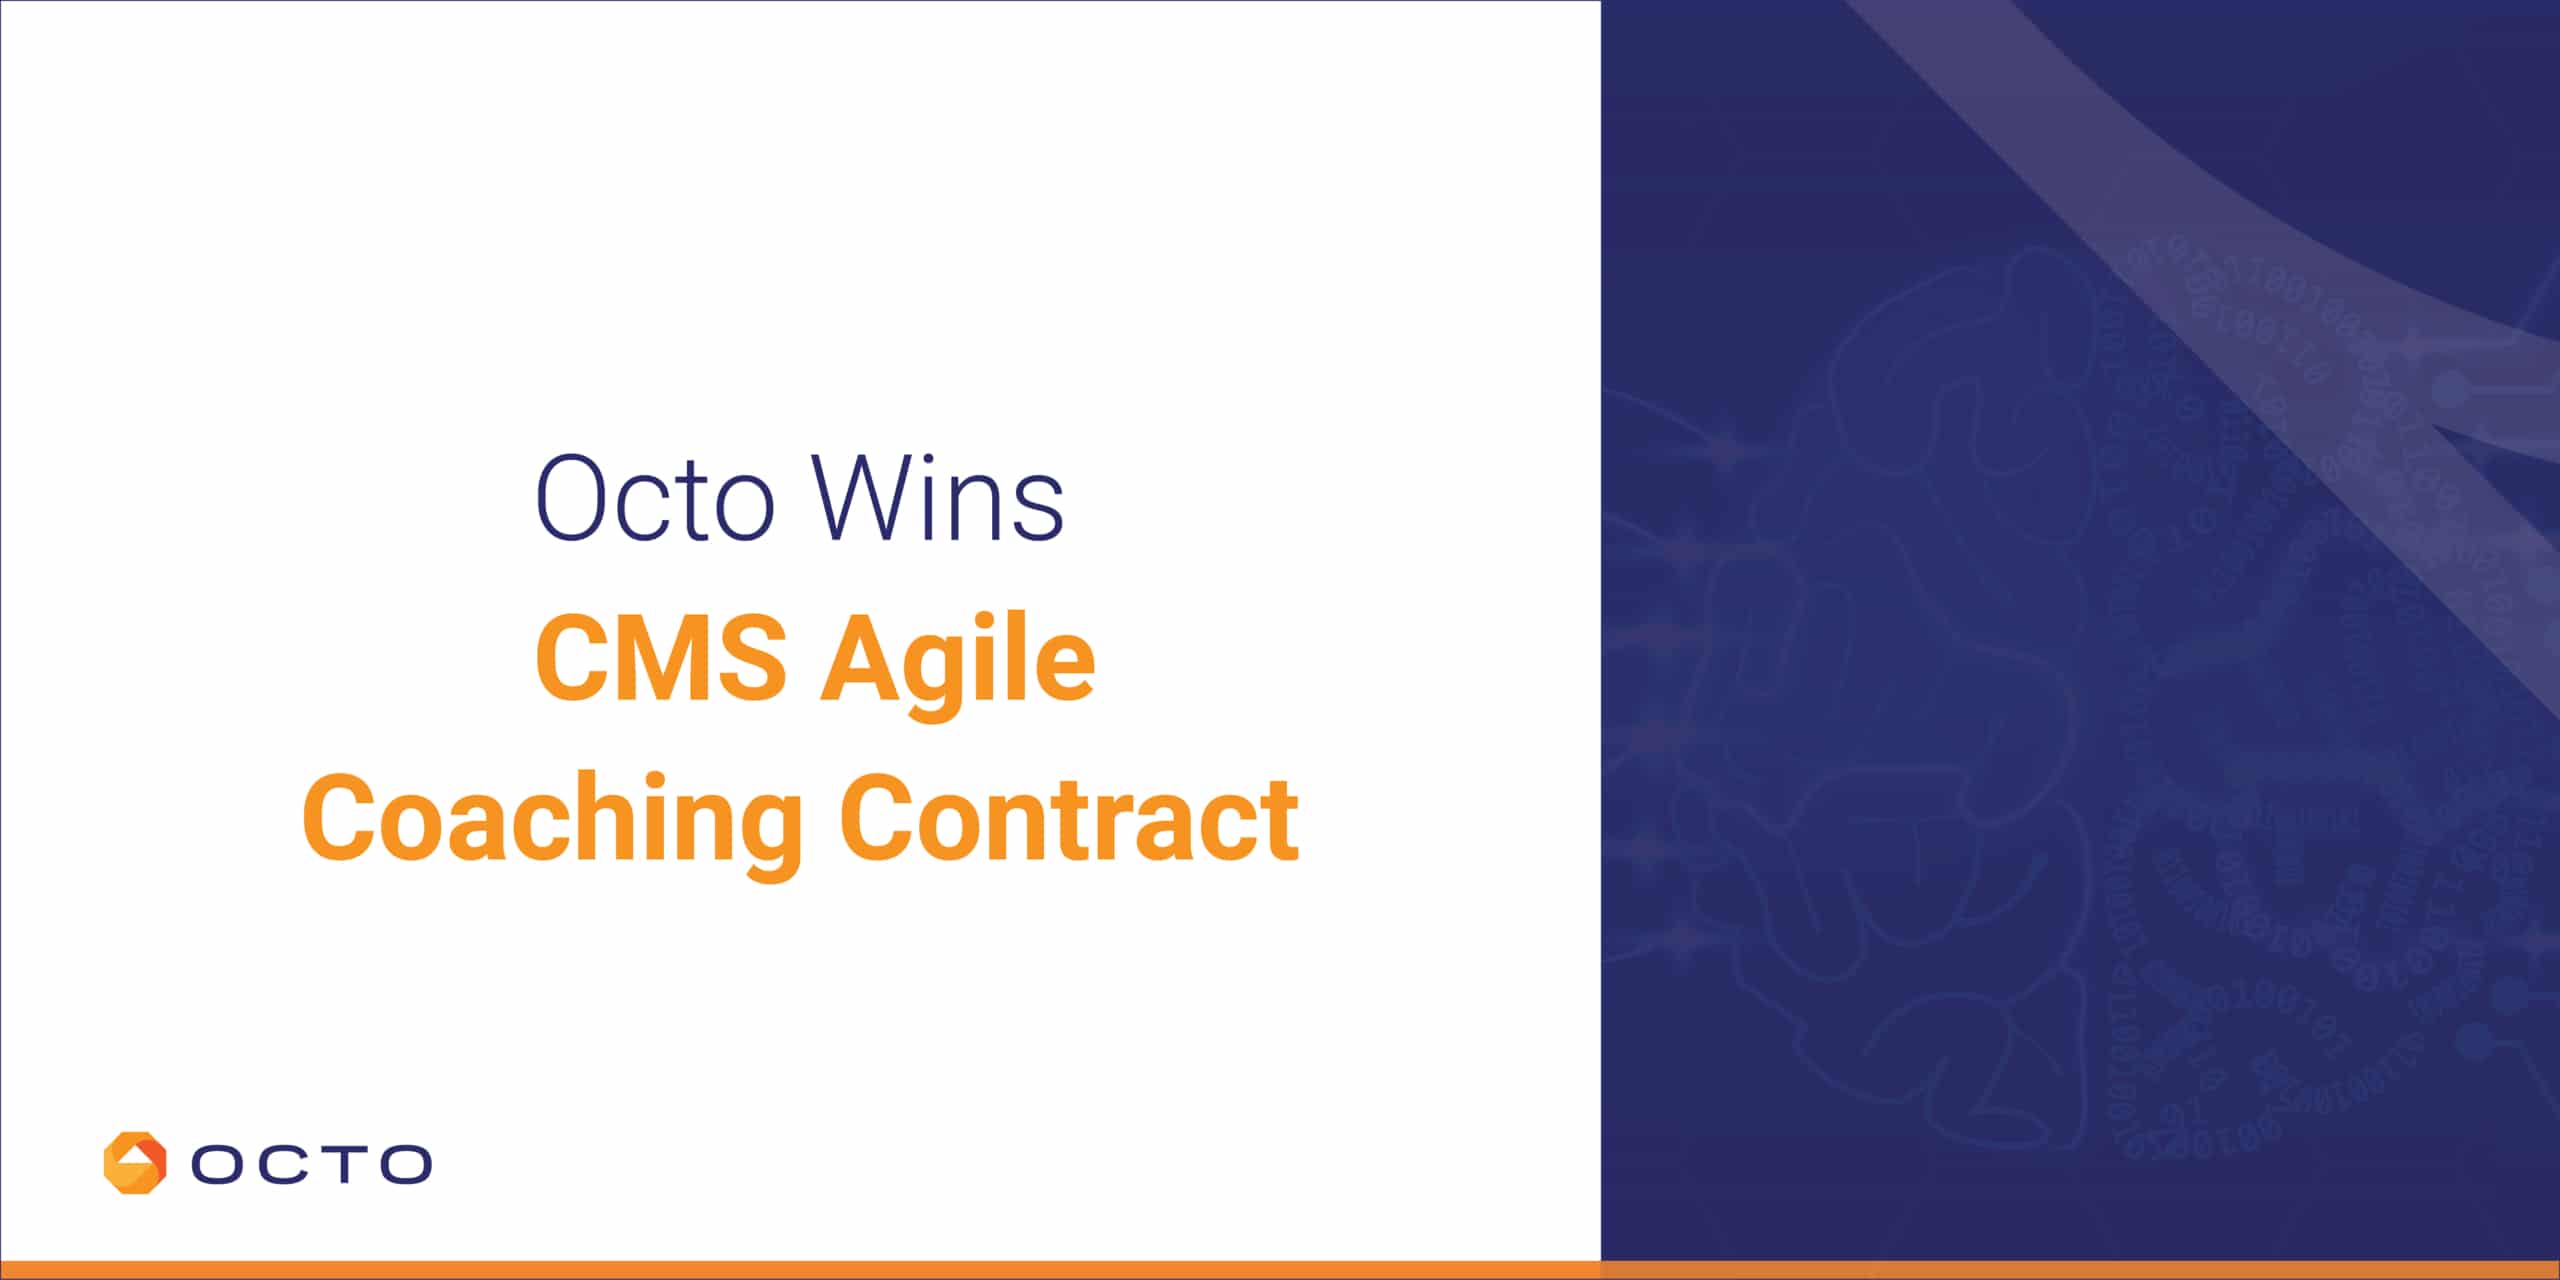 Octo Wins CMS Agile Coaching Contract